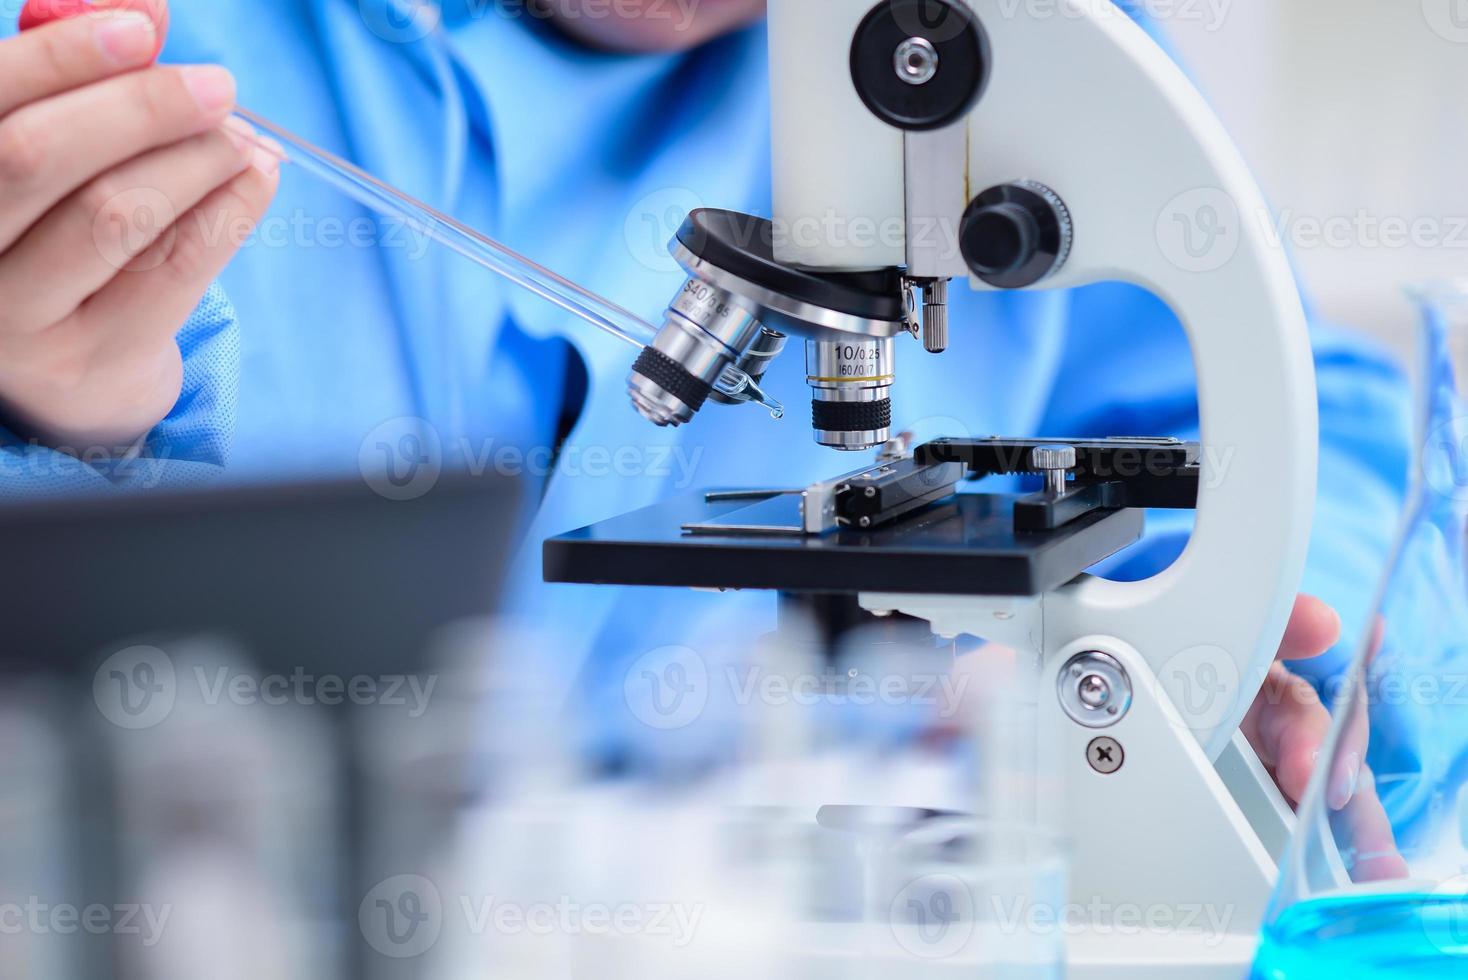 Scientists are preparing samples To examine the specimens with a microscope in lab, Dropping the solution on to a glass plate with a pipette on microscope. ,pharmaceutical concept,Invented the vaccine photo